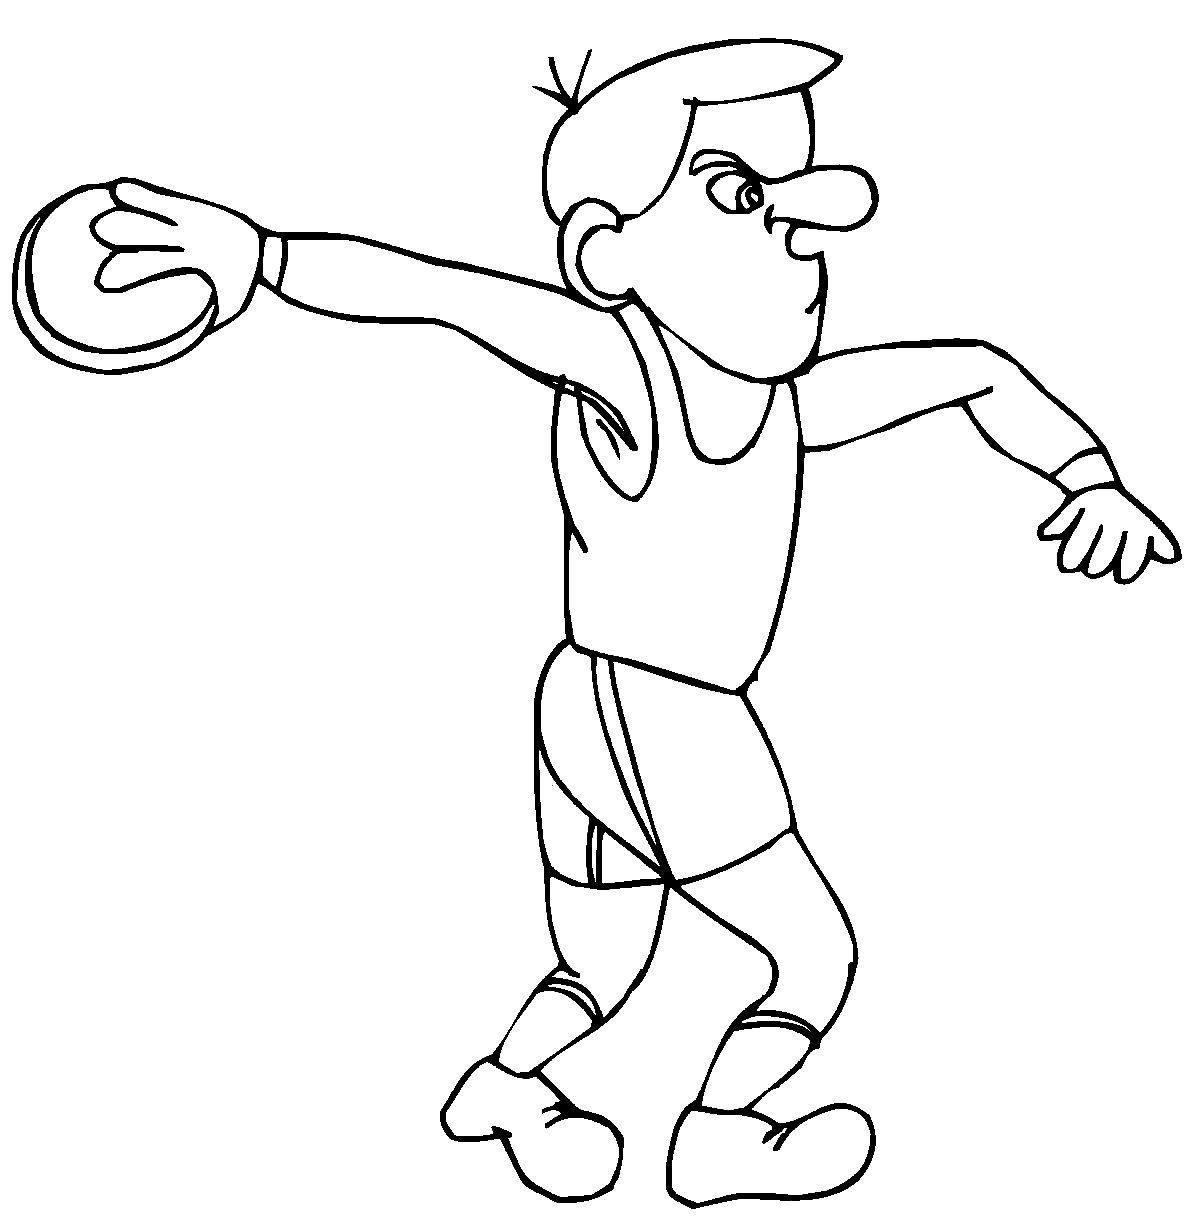 Discus Throw Coloring Page